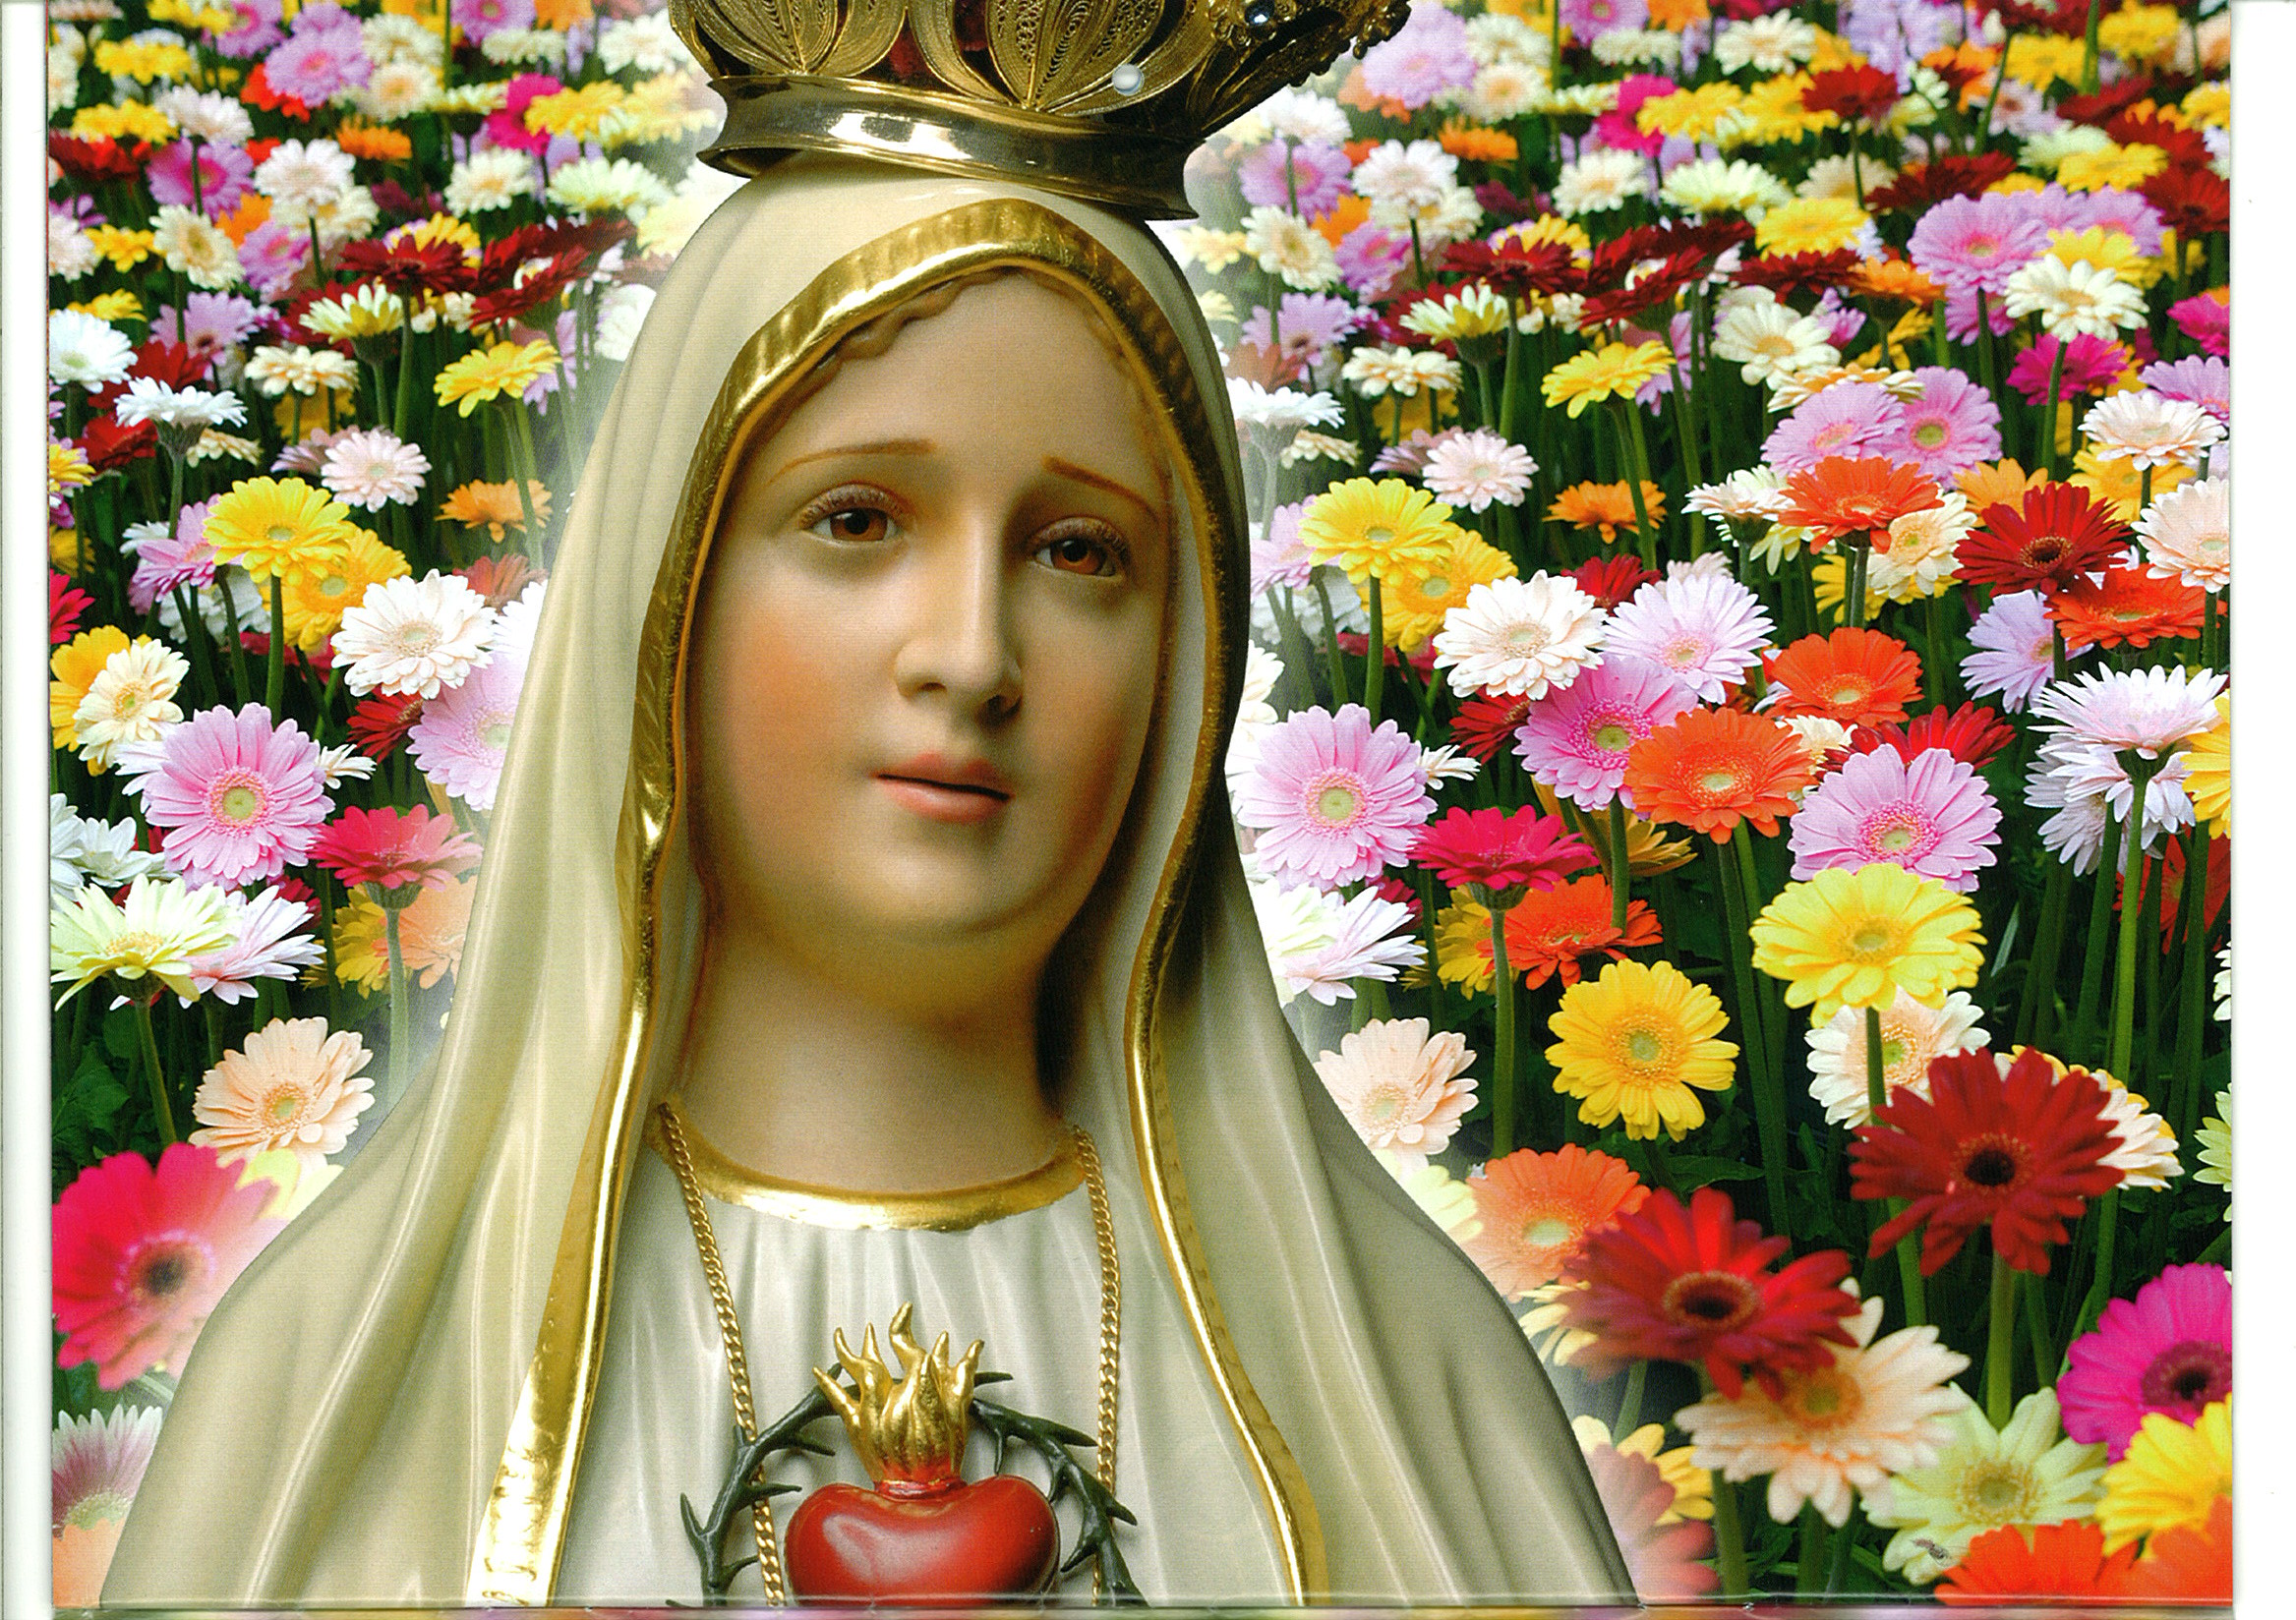 Wallpaper ID 461178  Religious Mary Phone Wallpaper Mary Mother Of Jesus  Our Lady Of Fátima 720x1280 free download